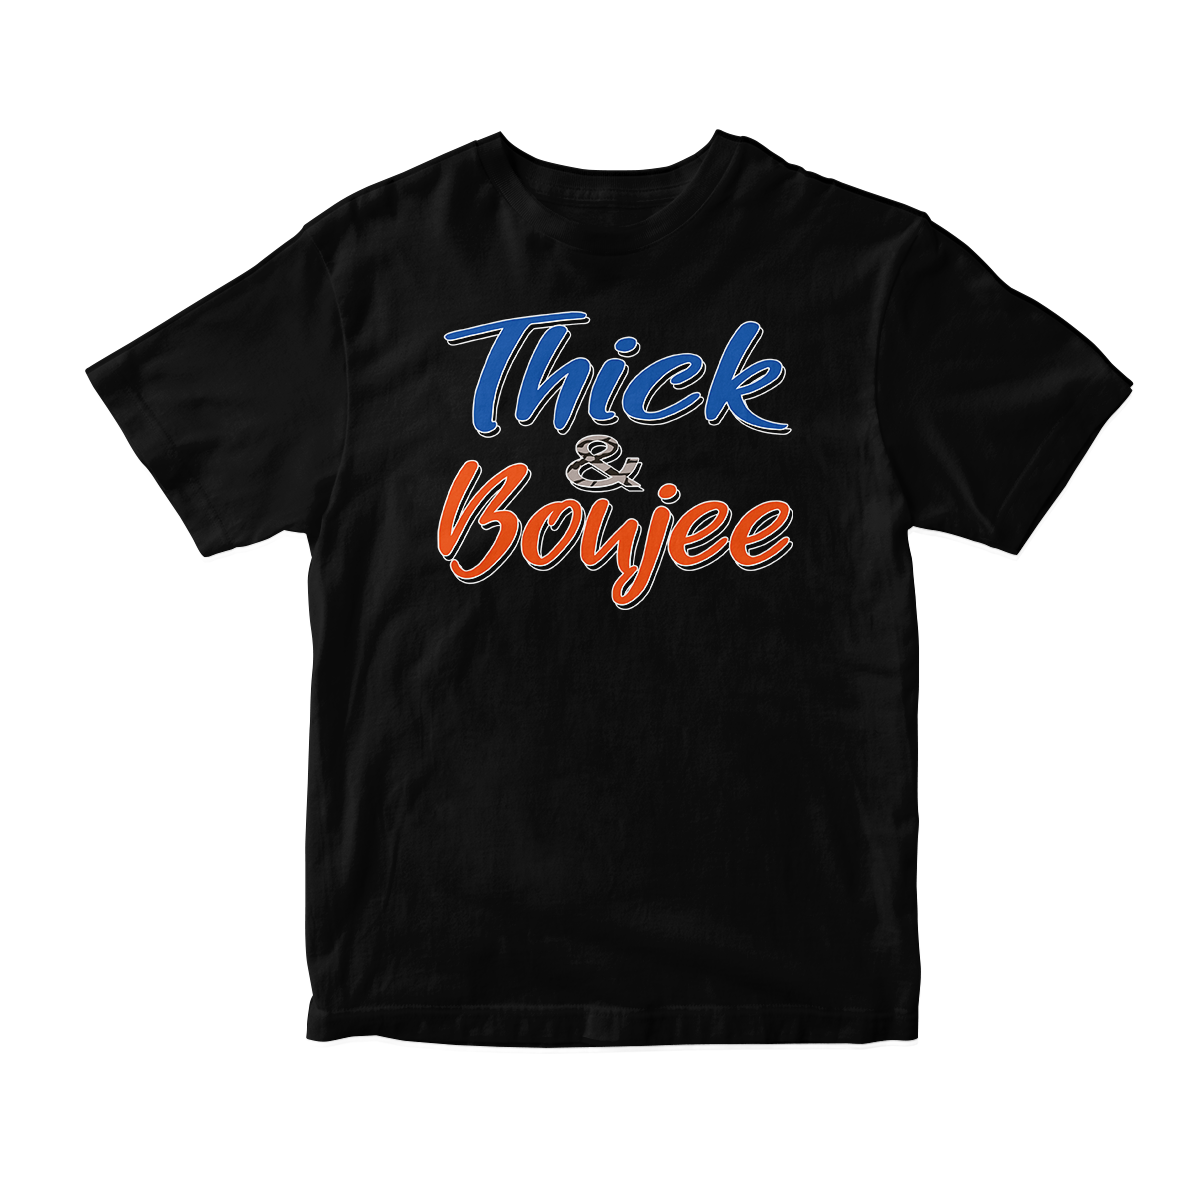 'Thick & Boujee' in Knicks CW Unisex Short Sleeve Tee